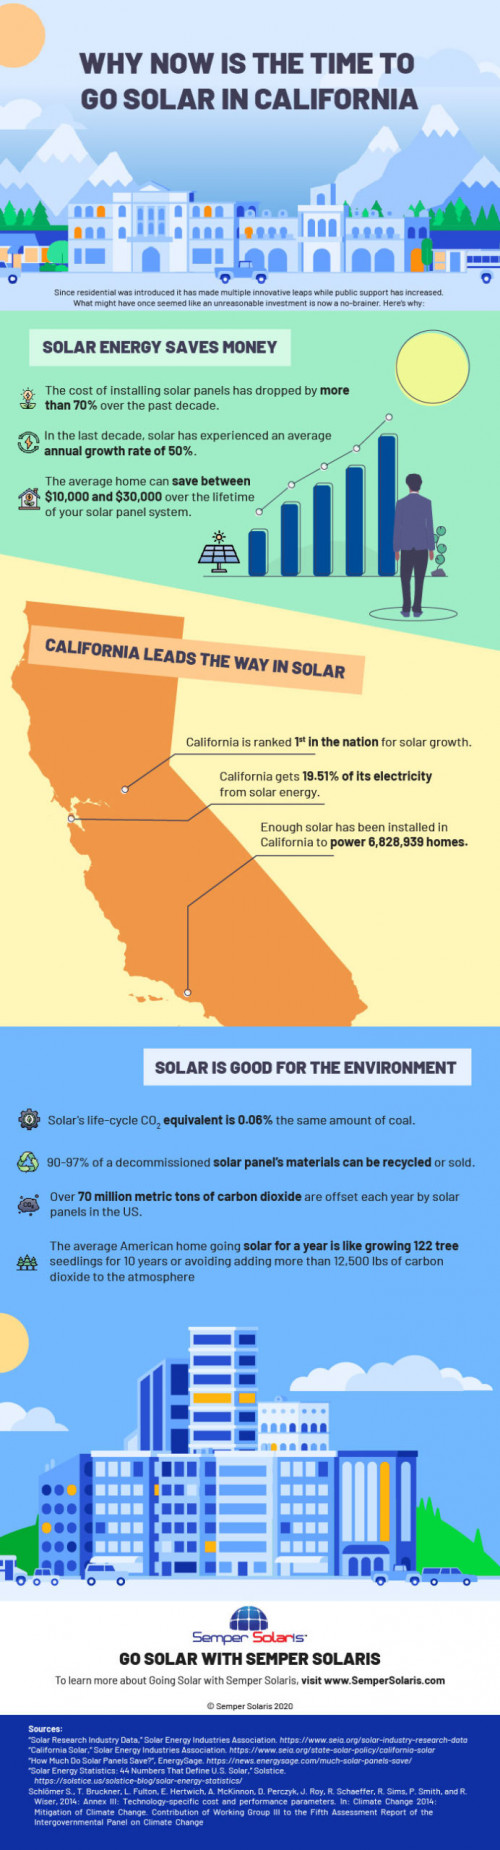 Why-Now-is-The-Time-to-Go-Solar-in-California.jpg